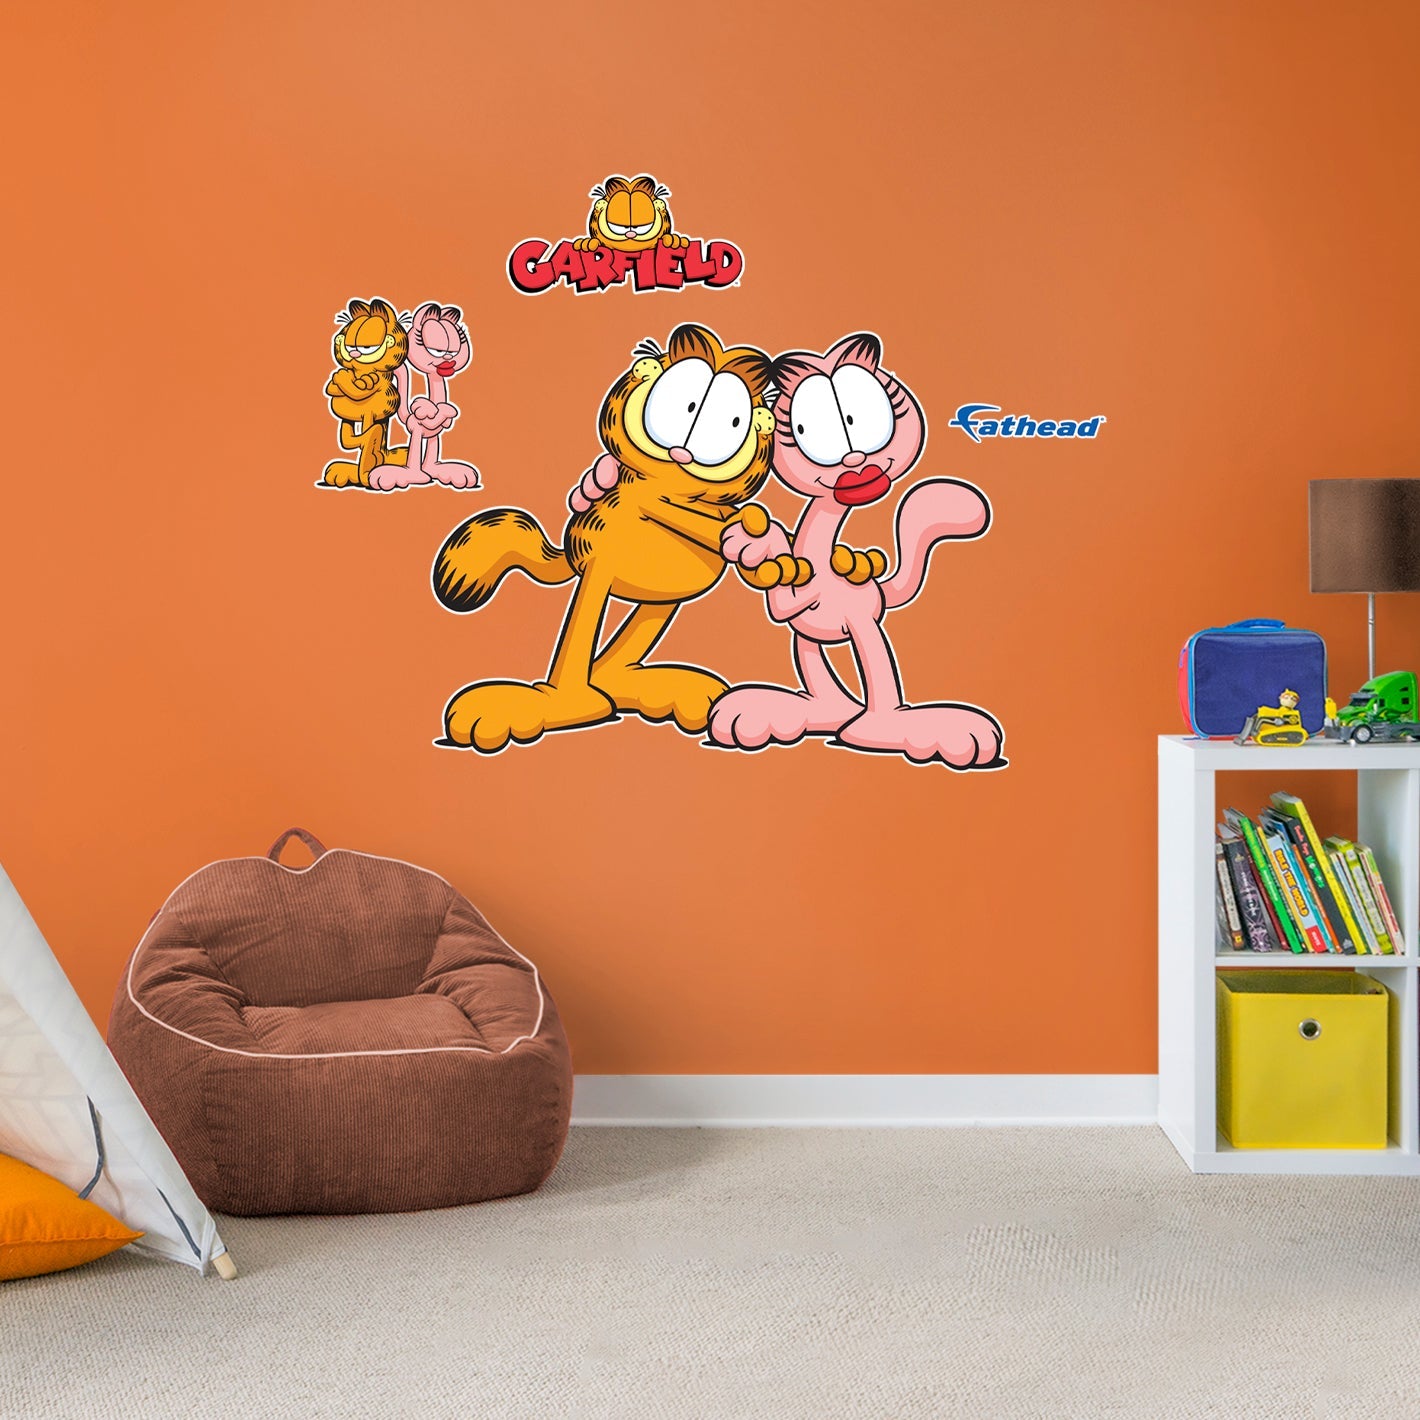 Garfield: Garfield & Arlene RealBigs - Officially Licensed Nickelodeon Removable Adhesive Decal